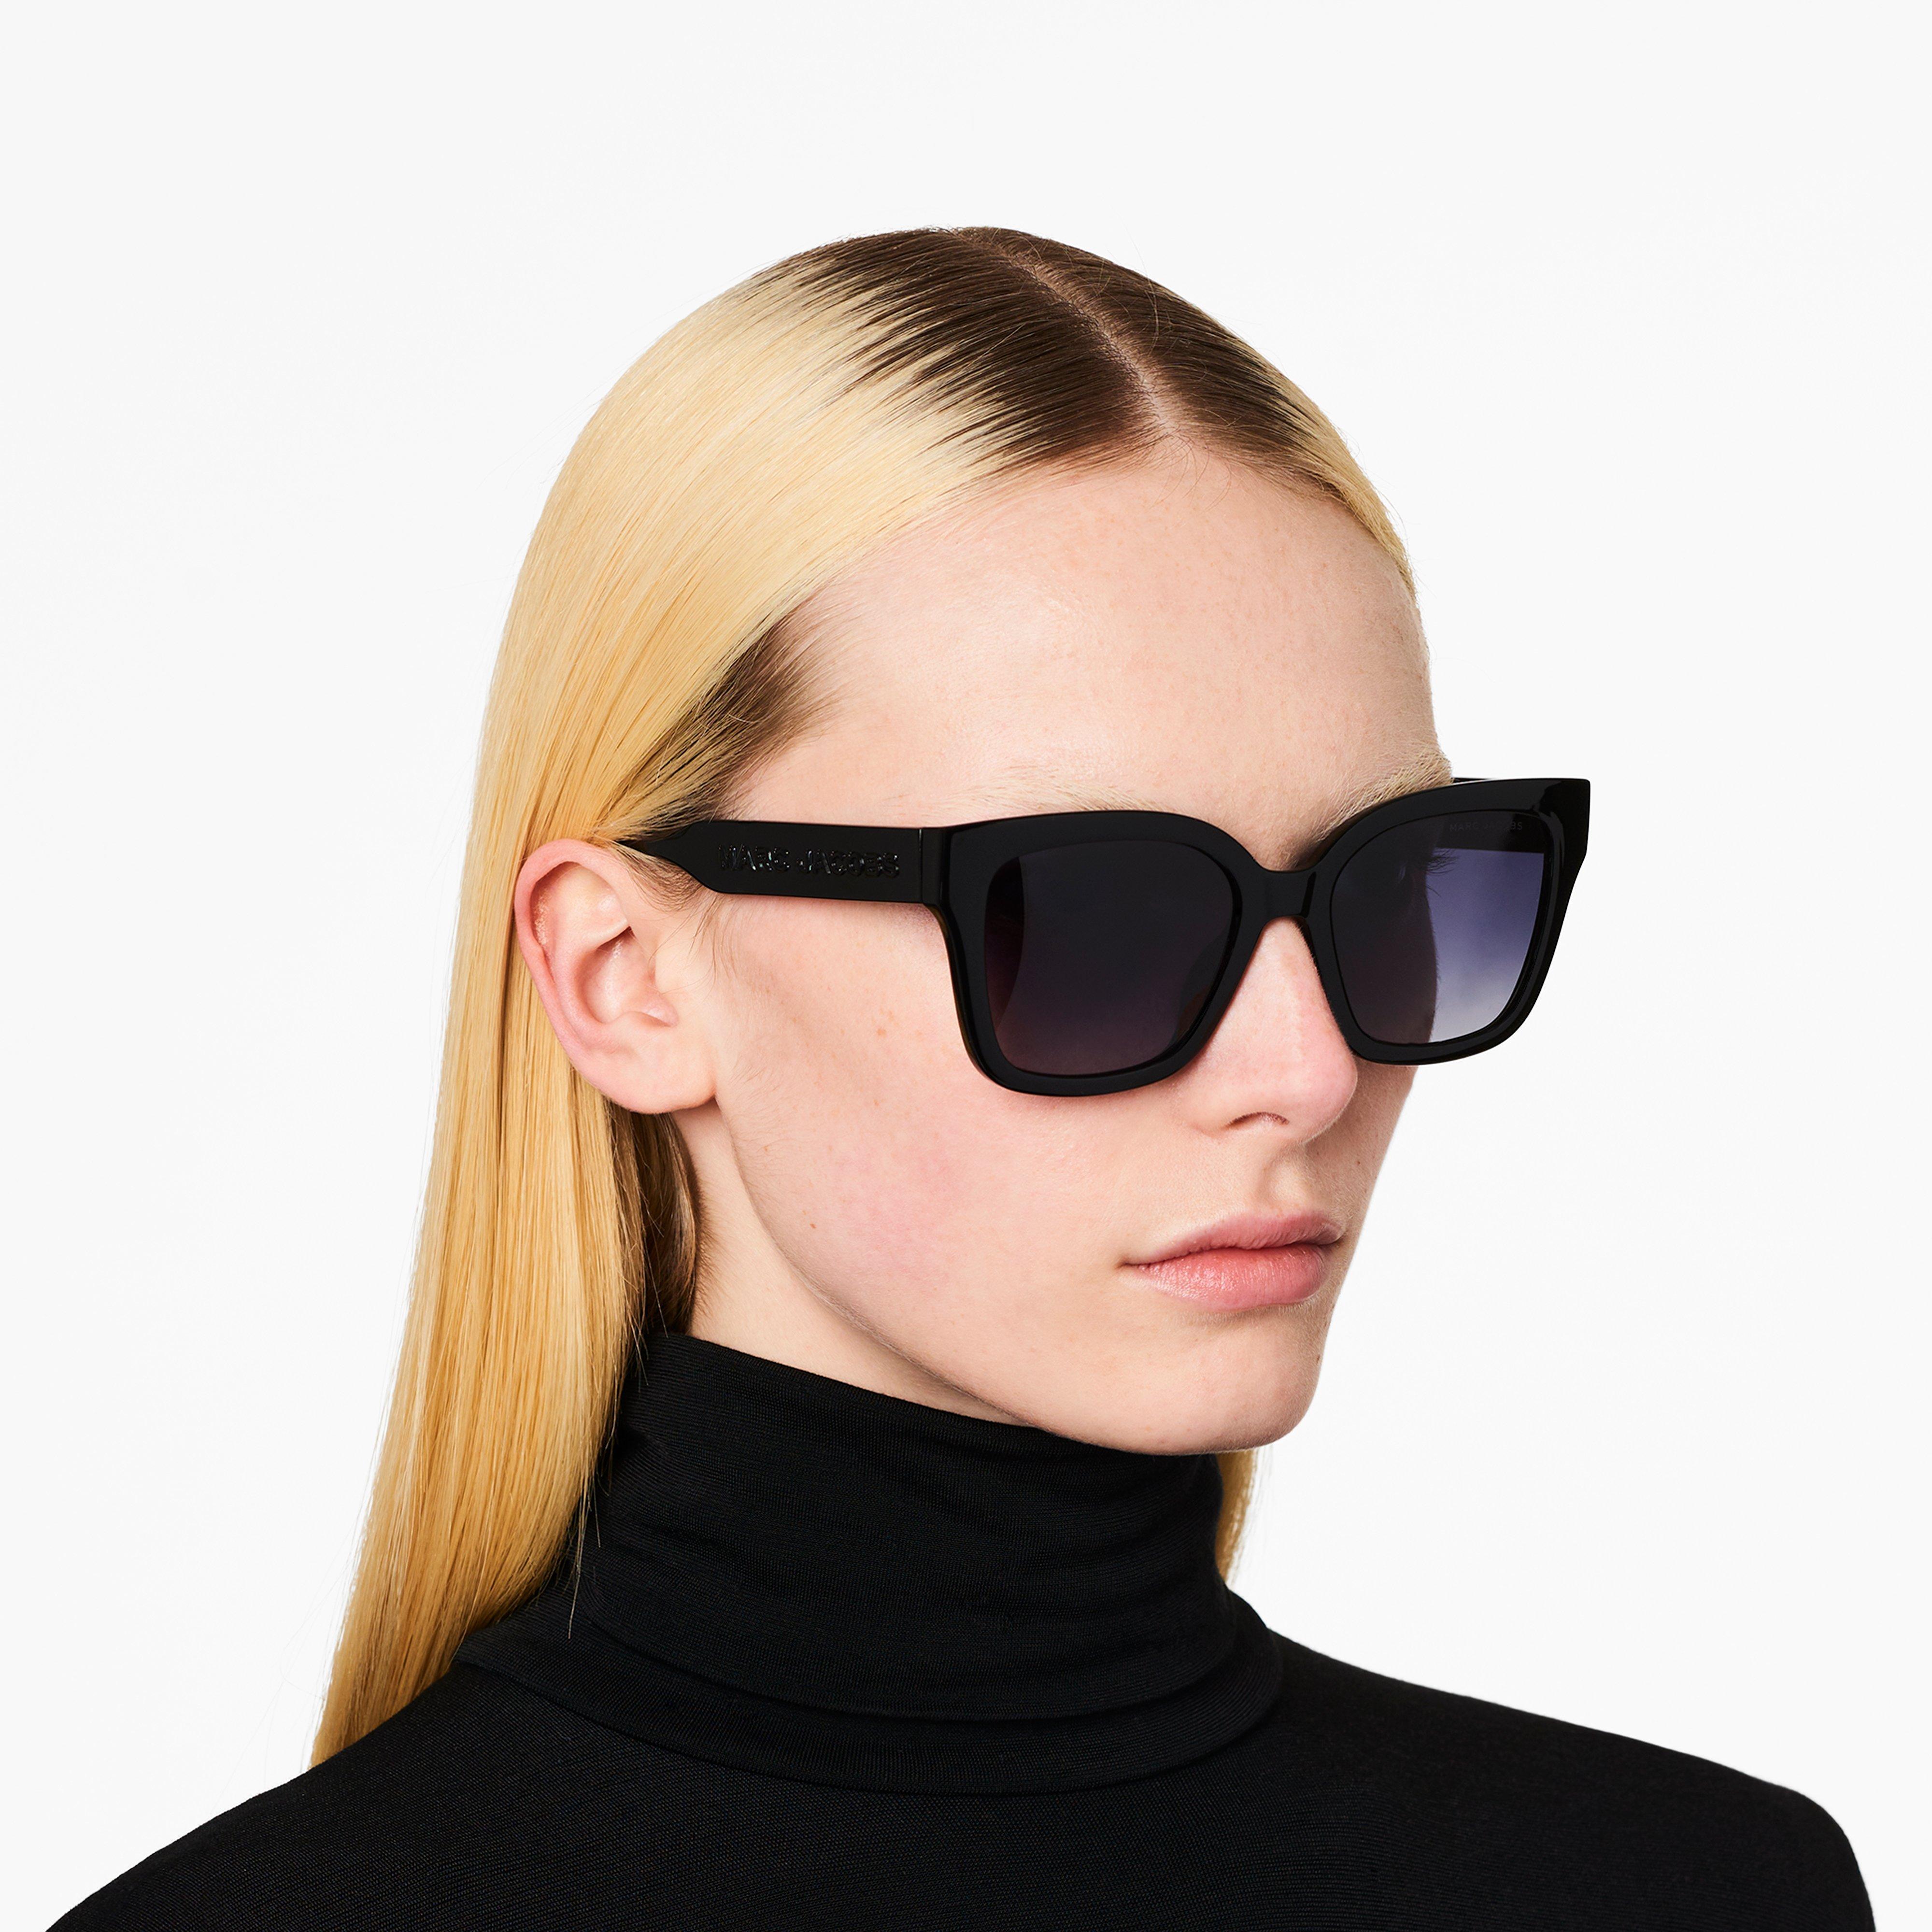 Marc Jacobs Square Sunglasses in Black | Lyst